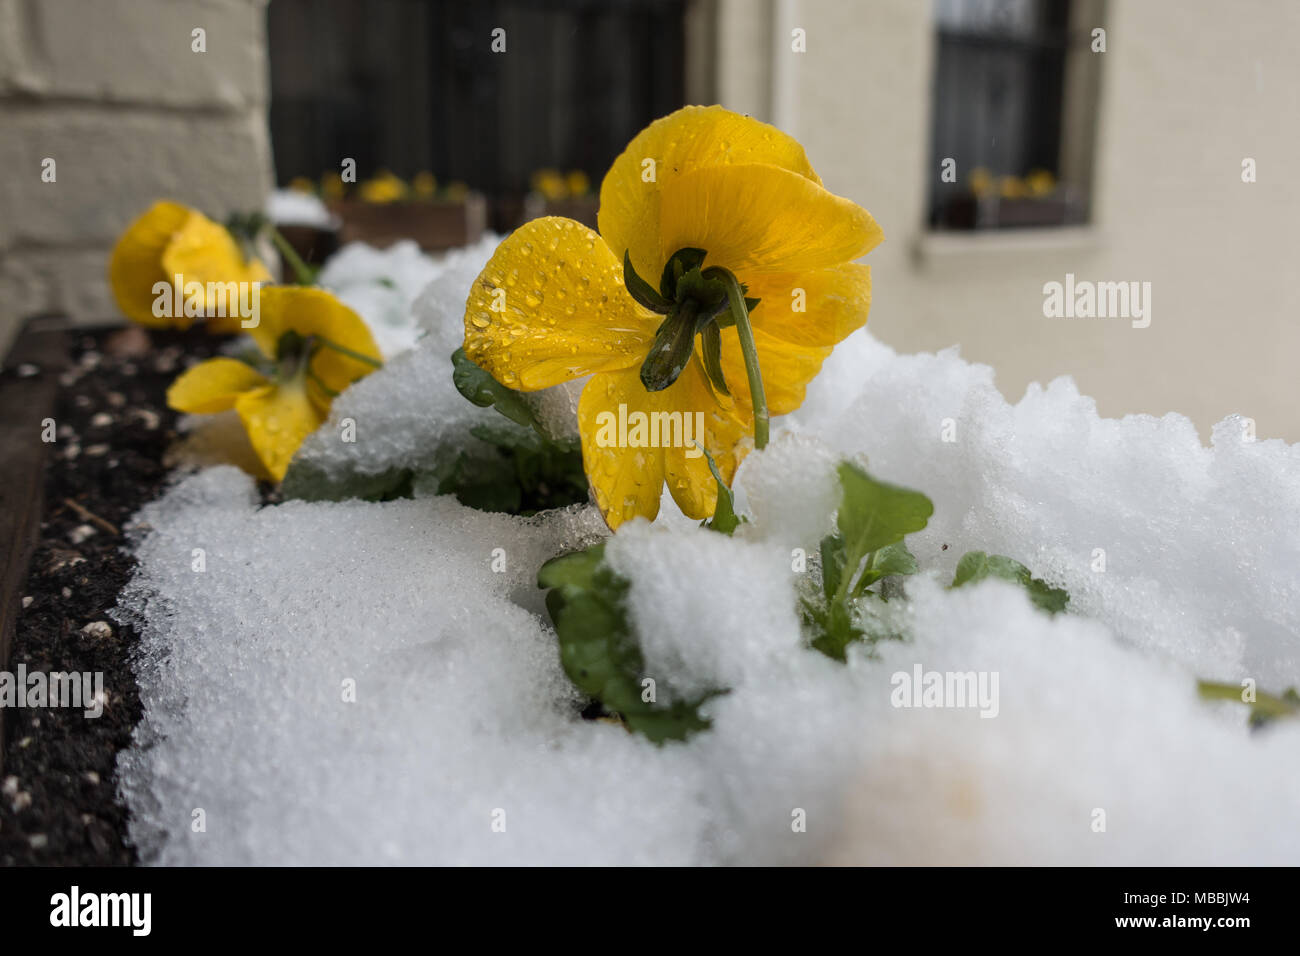 Pansies in window box coveerd with snow. hardy pansies can survive light freezes, ideal for Washington, DC varied March weather. Stock Photo